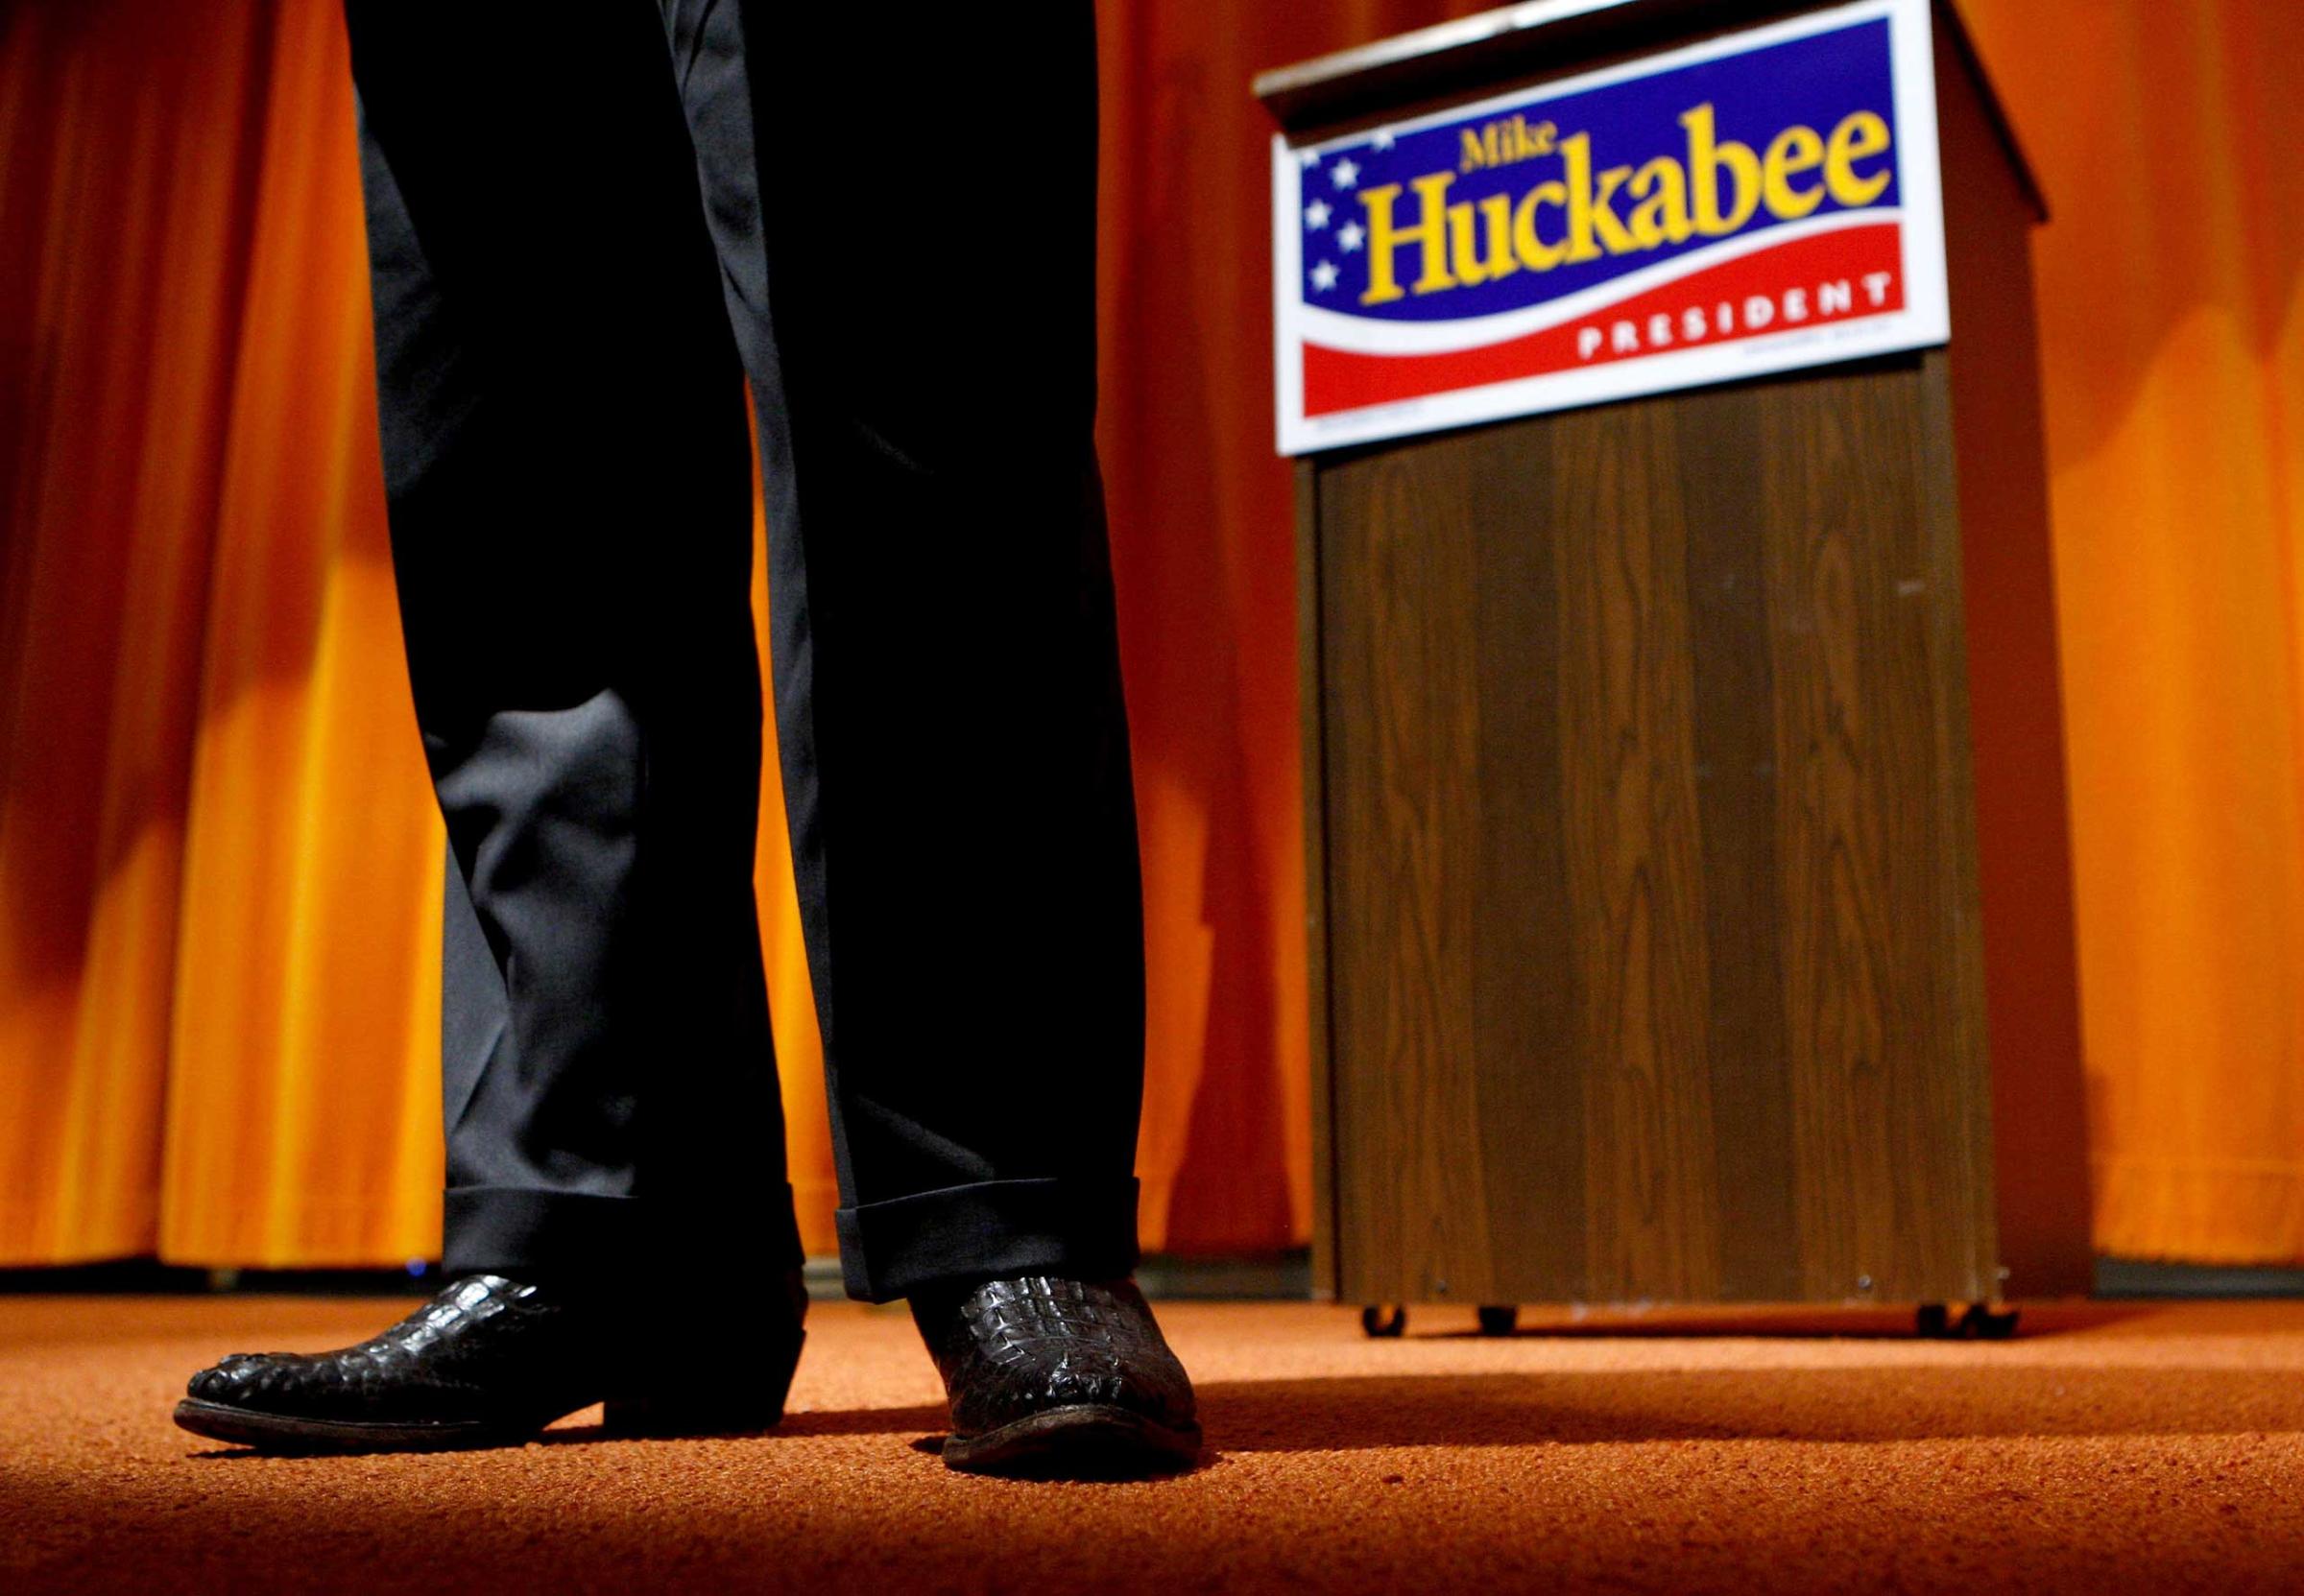 Huckabee Campaigns As January 3rd Iowa Caucus Approaches